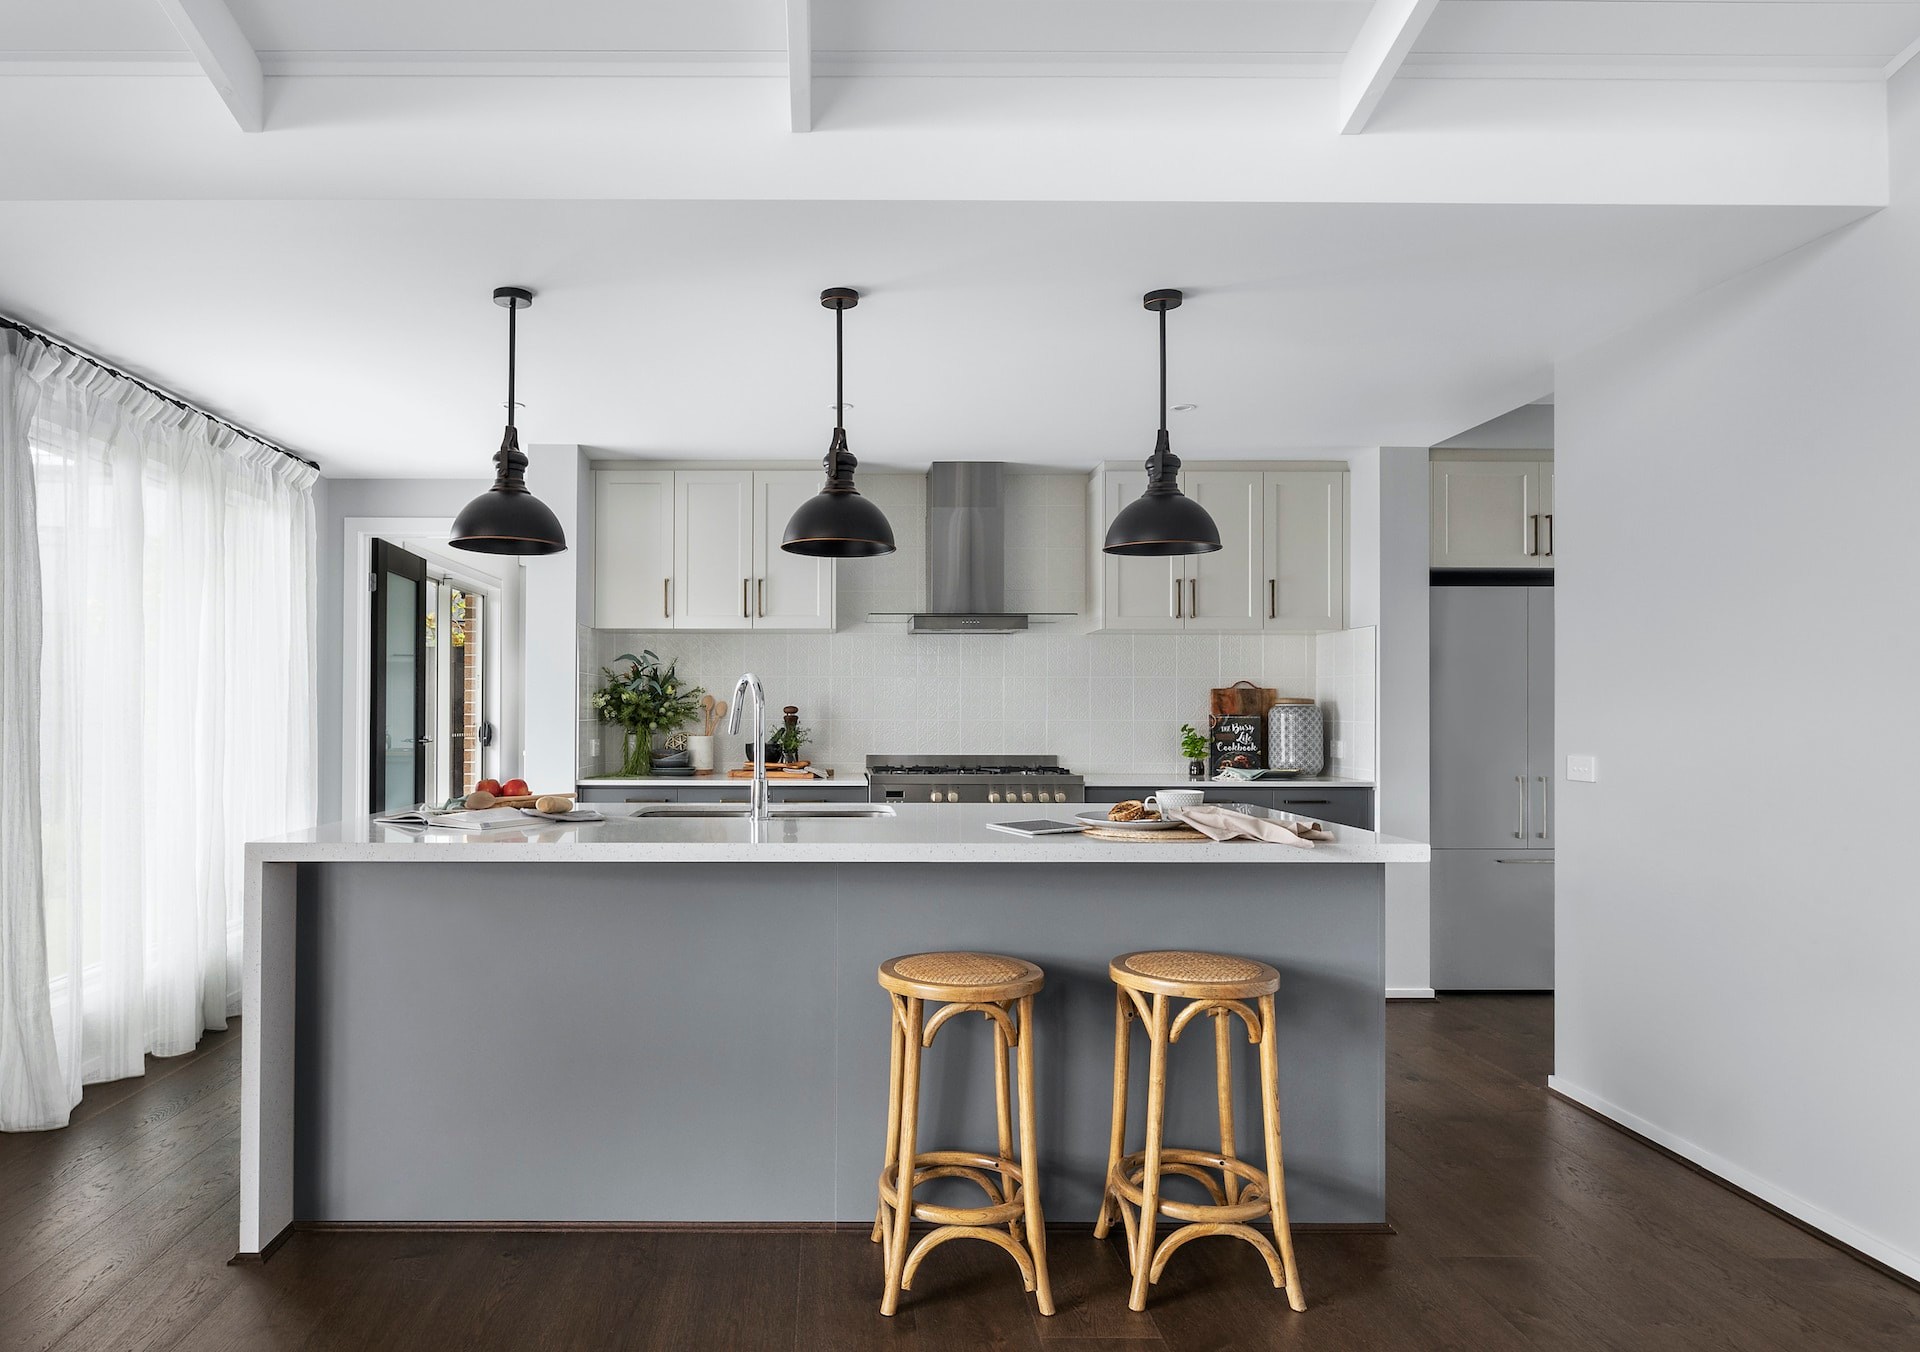 modern country kitchen with black industrial pendant lights over kitchen island